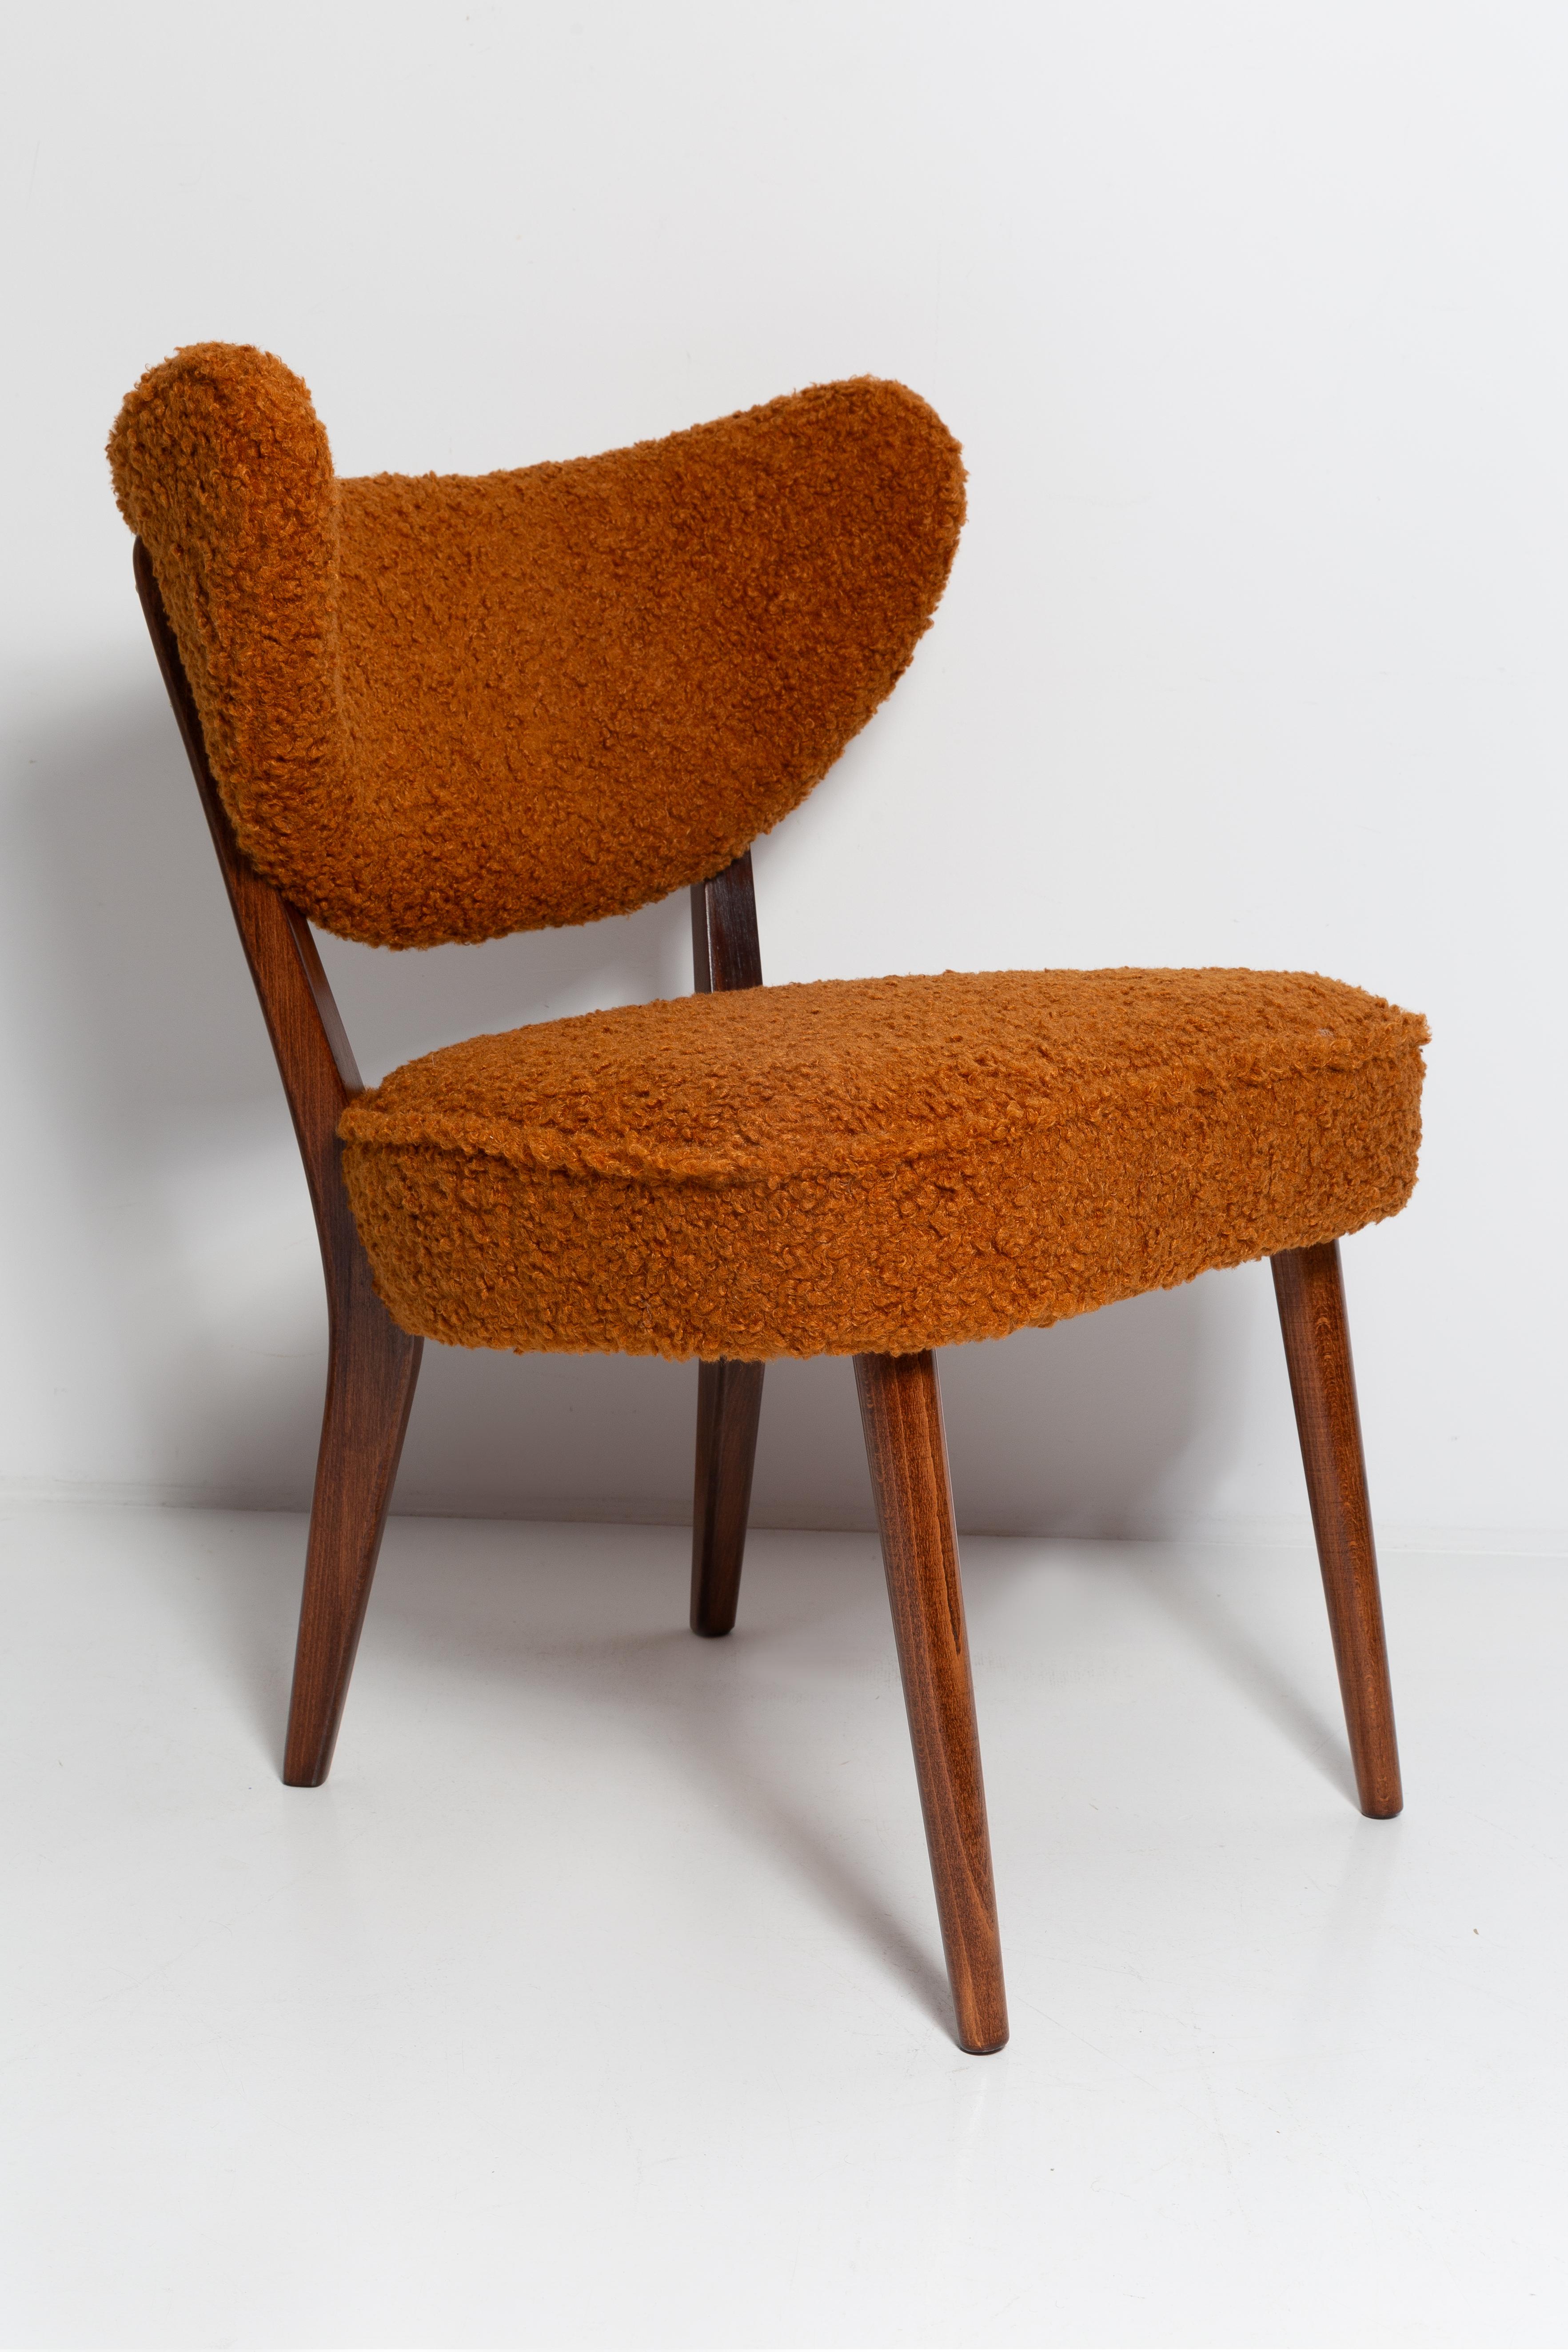 Springy, very comfortable and stabile club seats.
They are contemporary chairs inspired of 1960s style. 
They can be used as armchairs and dining chairs. 

Chair was designed by Vintola Studio, a Polish brand created by Ola Szewczul, designer of